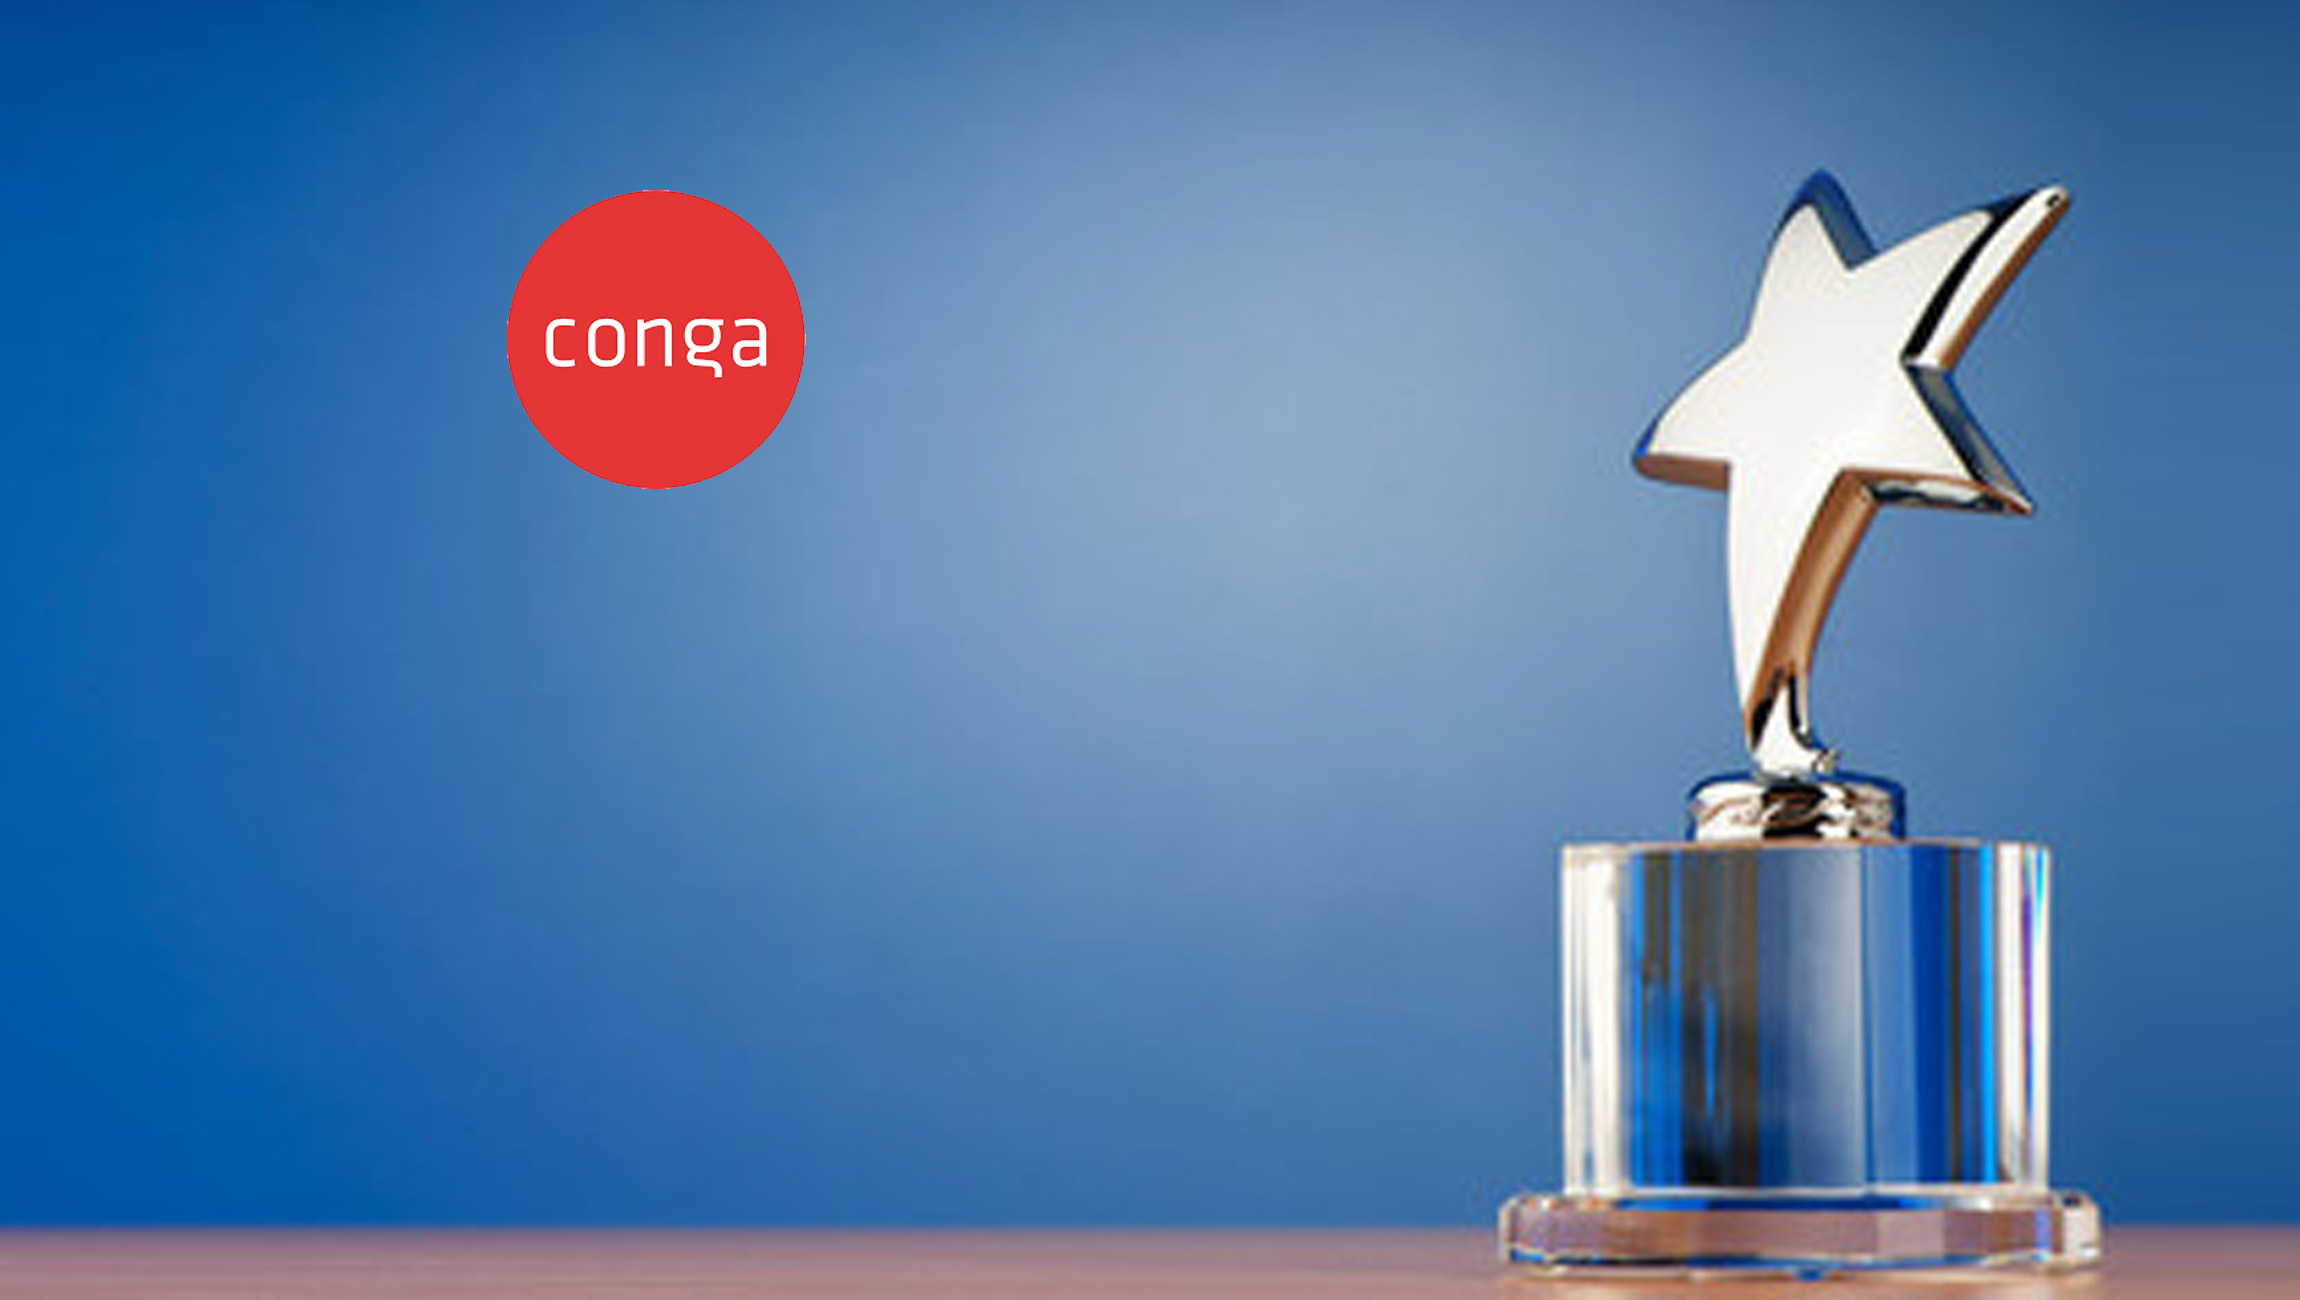 Conga Wins Two 2022 Aragon Research Awards, Including the Innovation Award and Women in Technology Award